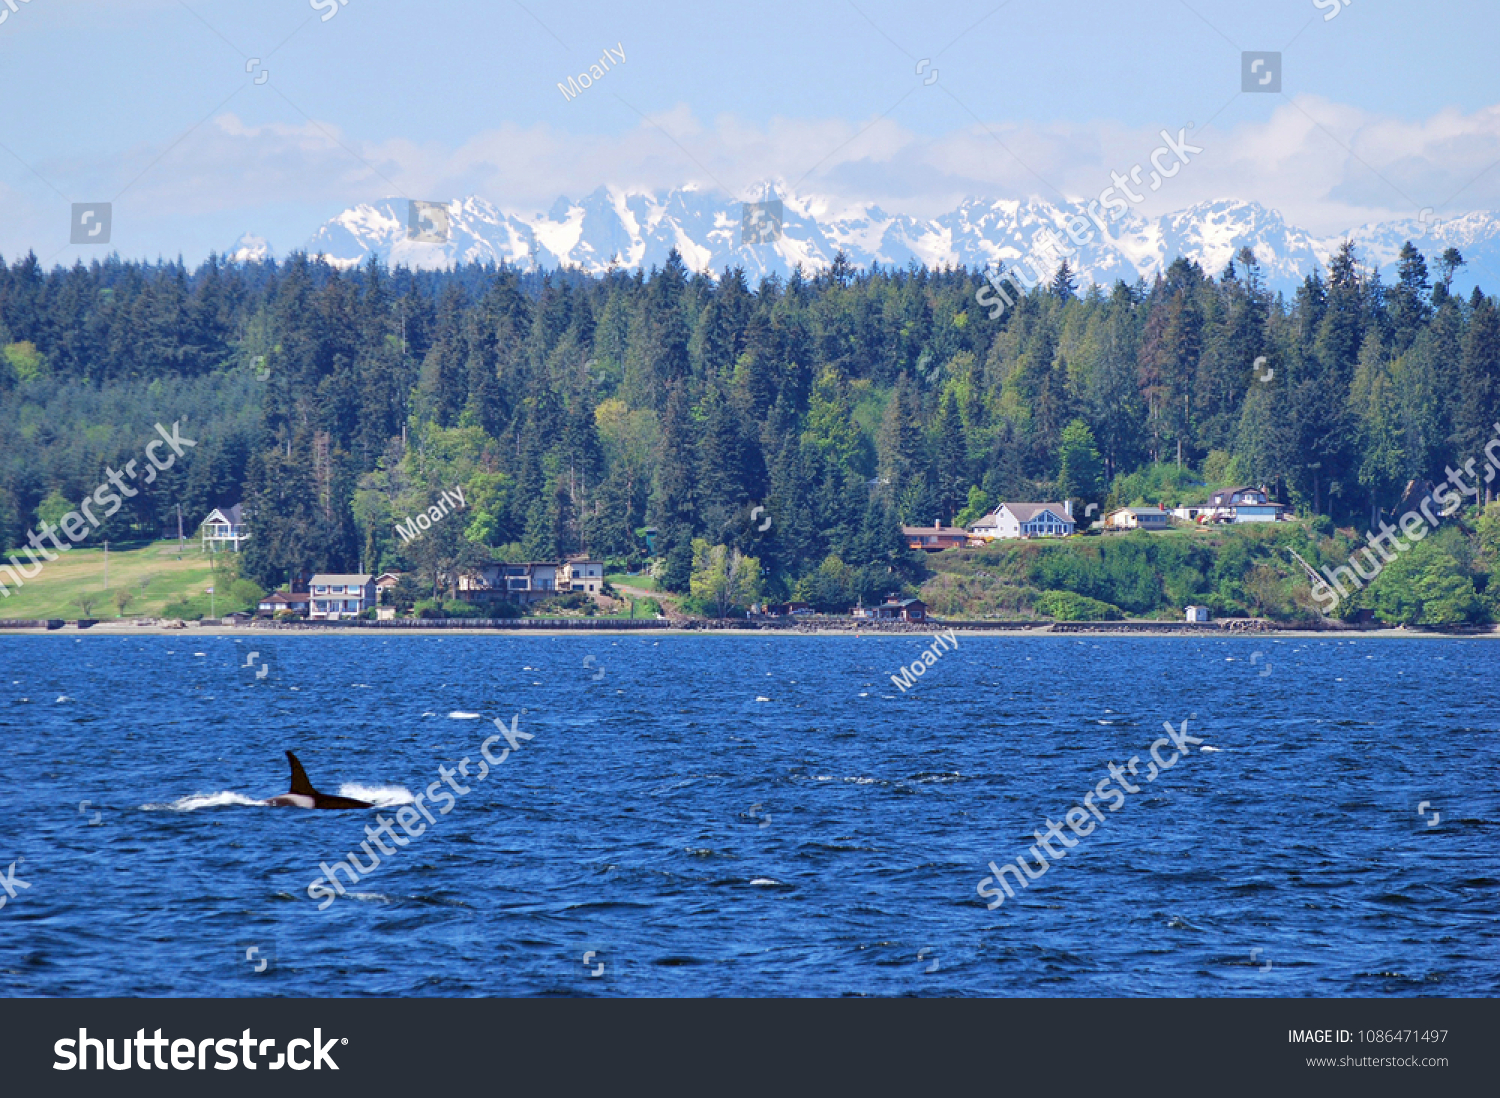 Orca whale surfaces in Puget Sound with Olympic Mountains in background #1086471497